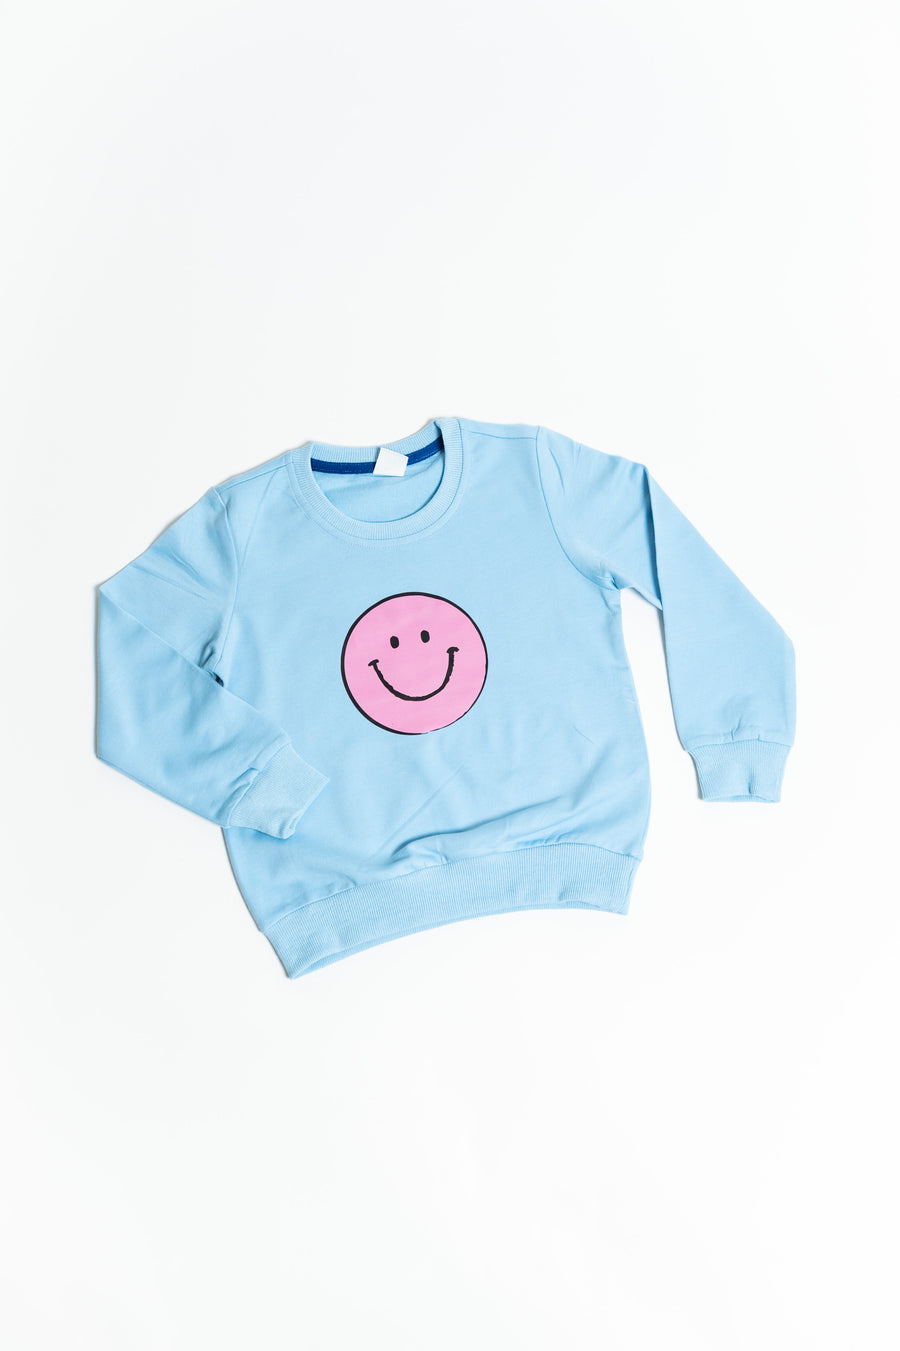 HAPPINESS SWEATER